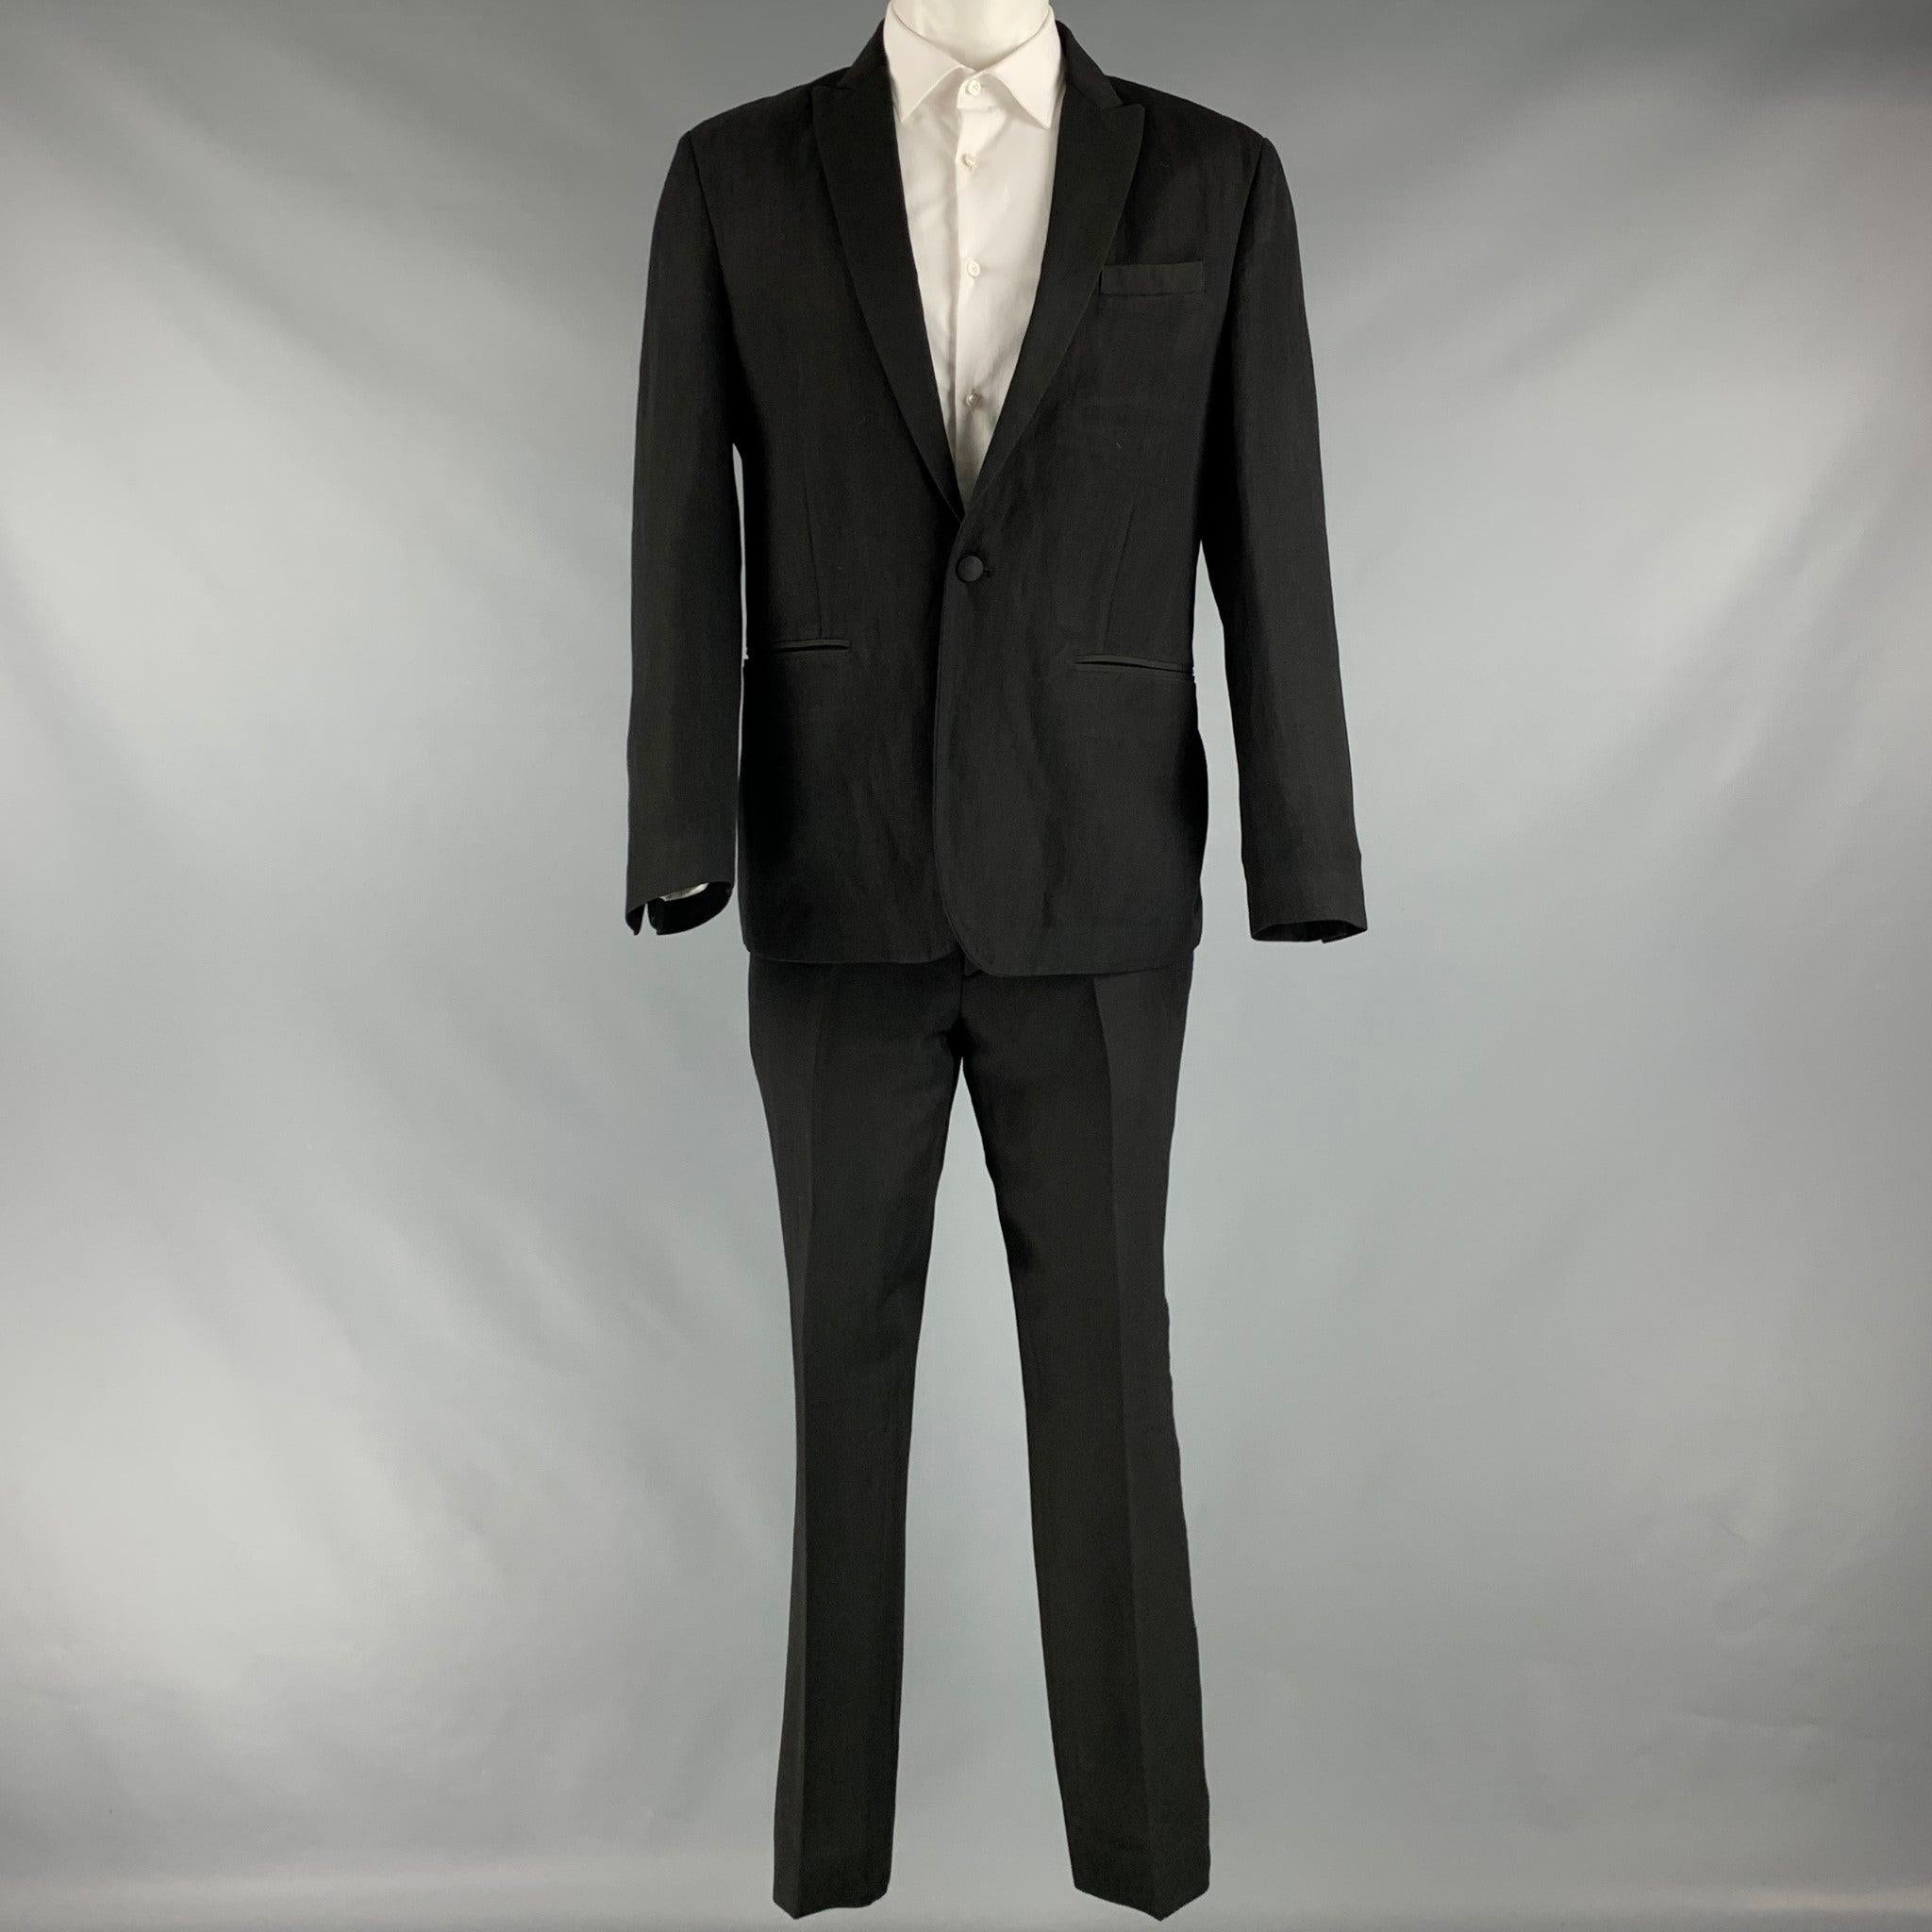 JOHN VARVATOS suit comes in a black linen and wool woven material featuring a peak lapel, welt pockets, single back vent, and a single button closure. Matching pants with a flat front pants. Made in Italy.Excellent Pre-Owned Condition. 

Marked:  